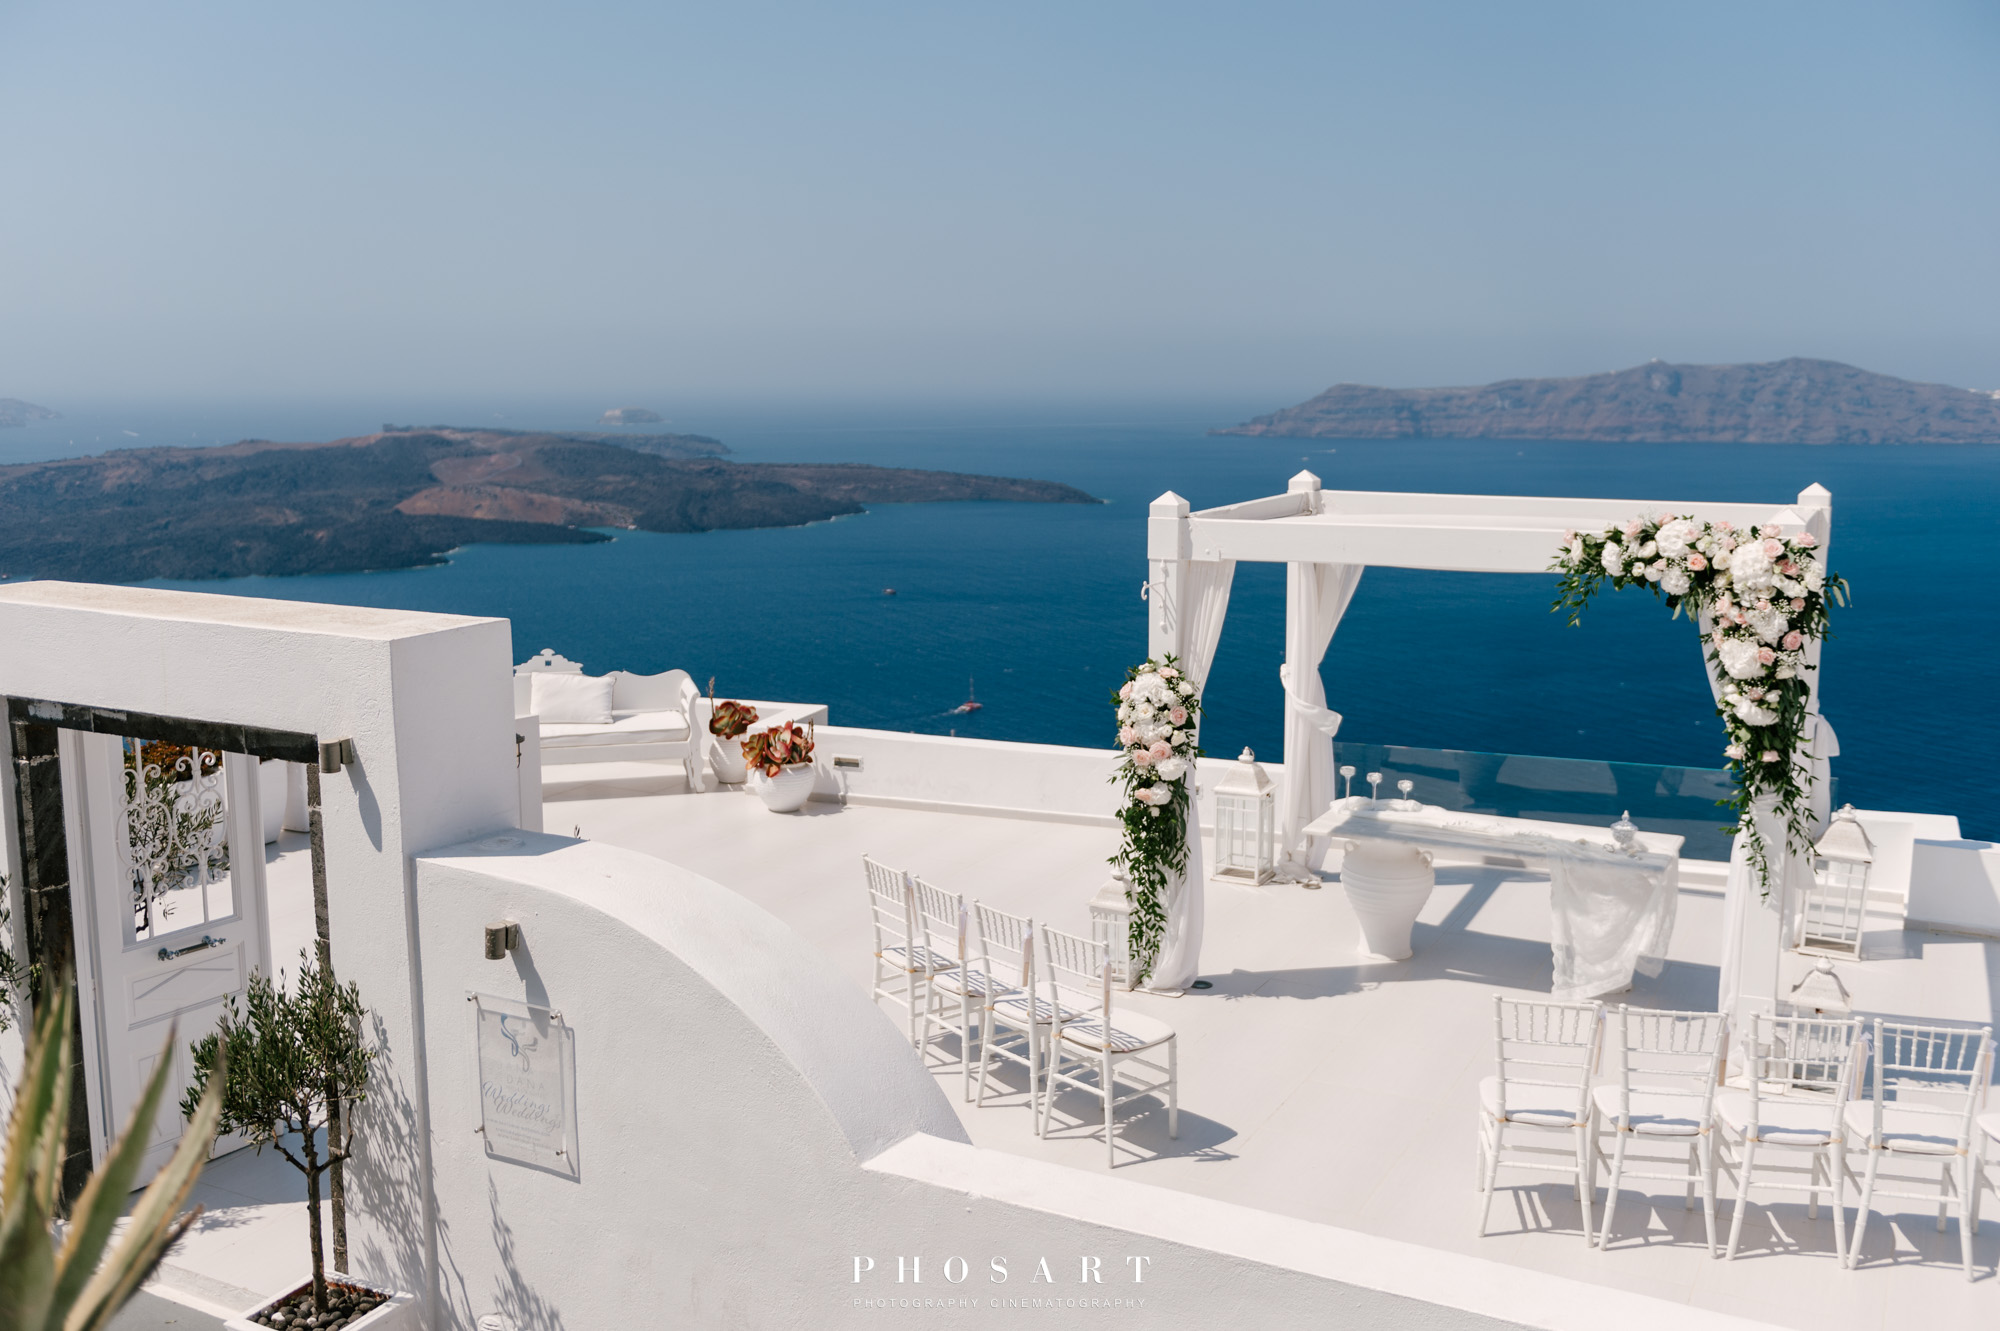 Dana Villas' large terrace above the caldera overlooking Aegean & Thirasia decorated with white furniture for a wedding ceremony